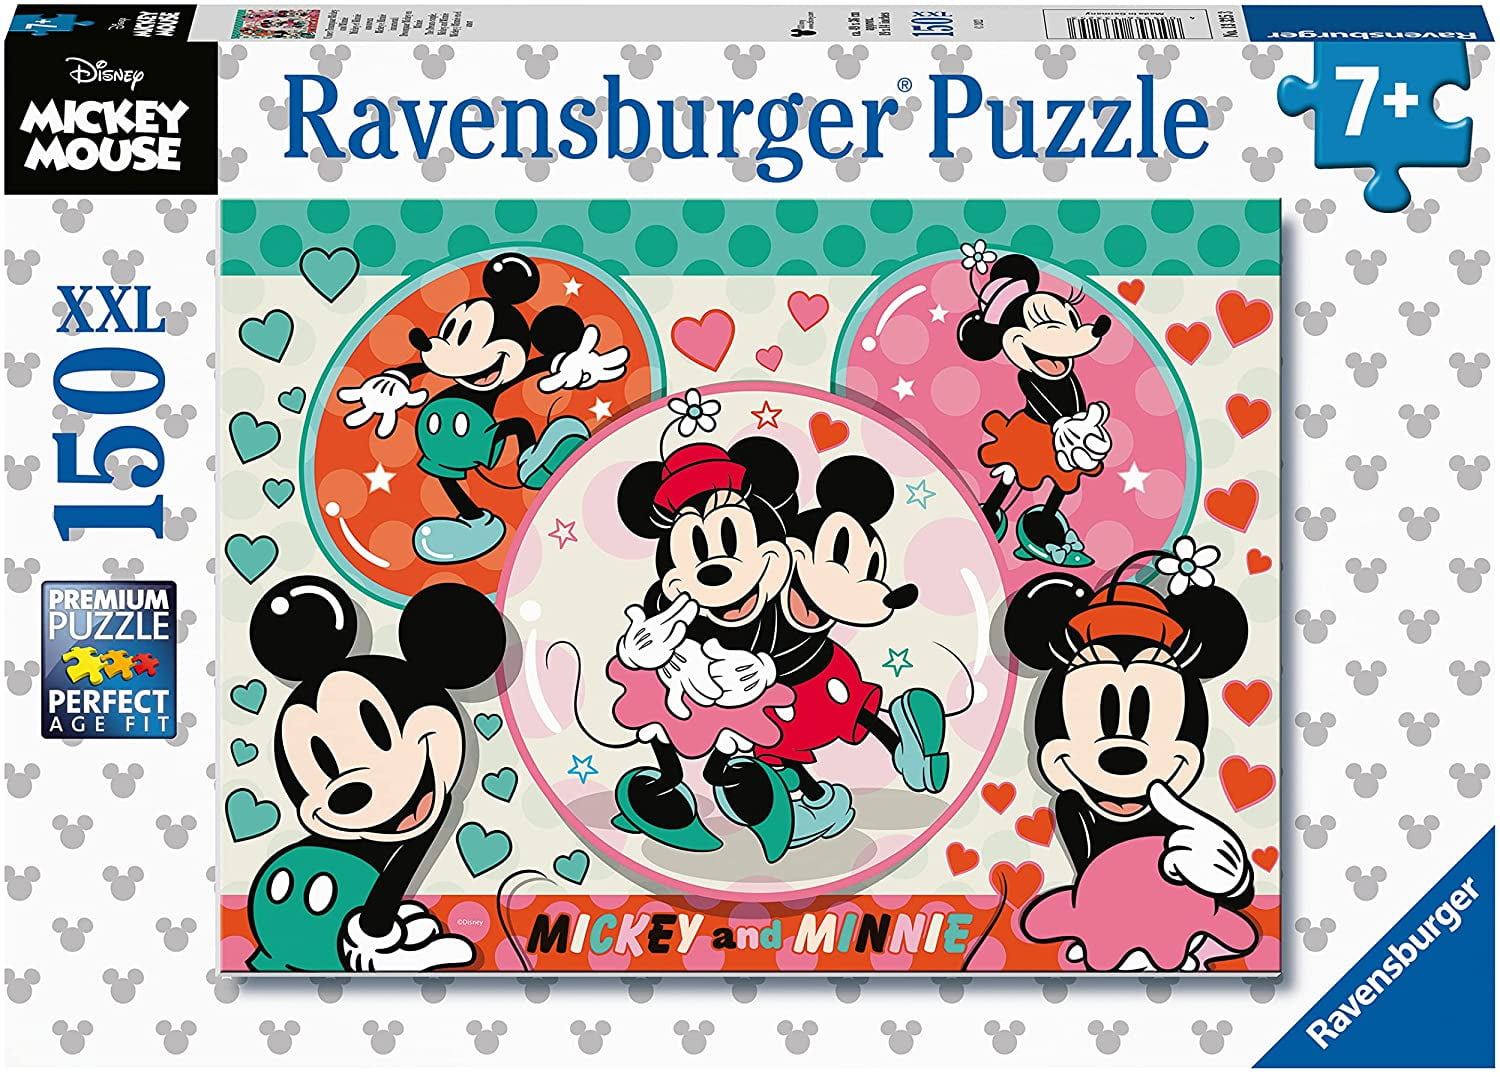 RAVENSBURGER Puzzle 13325 Ravensburger 13325-Our Dream Couple Mickey and Minnie-150 Pieces XXL Disney Puzzle for - Walmart.com